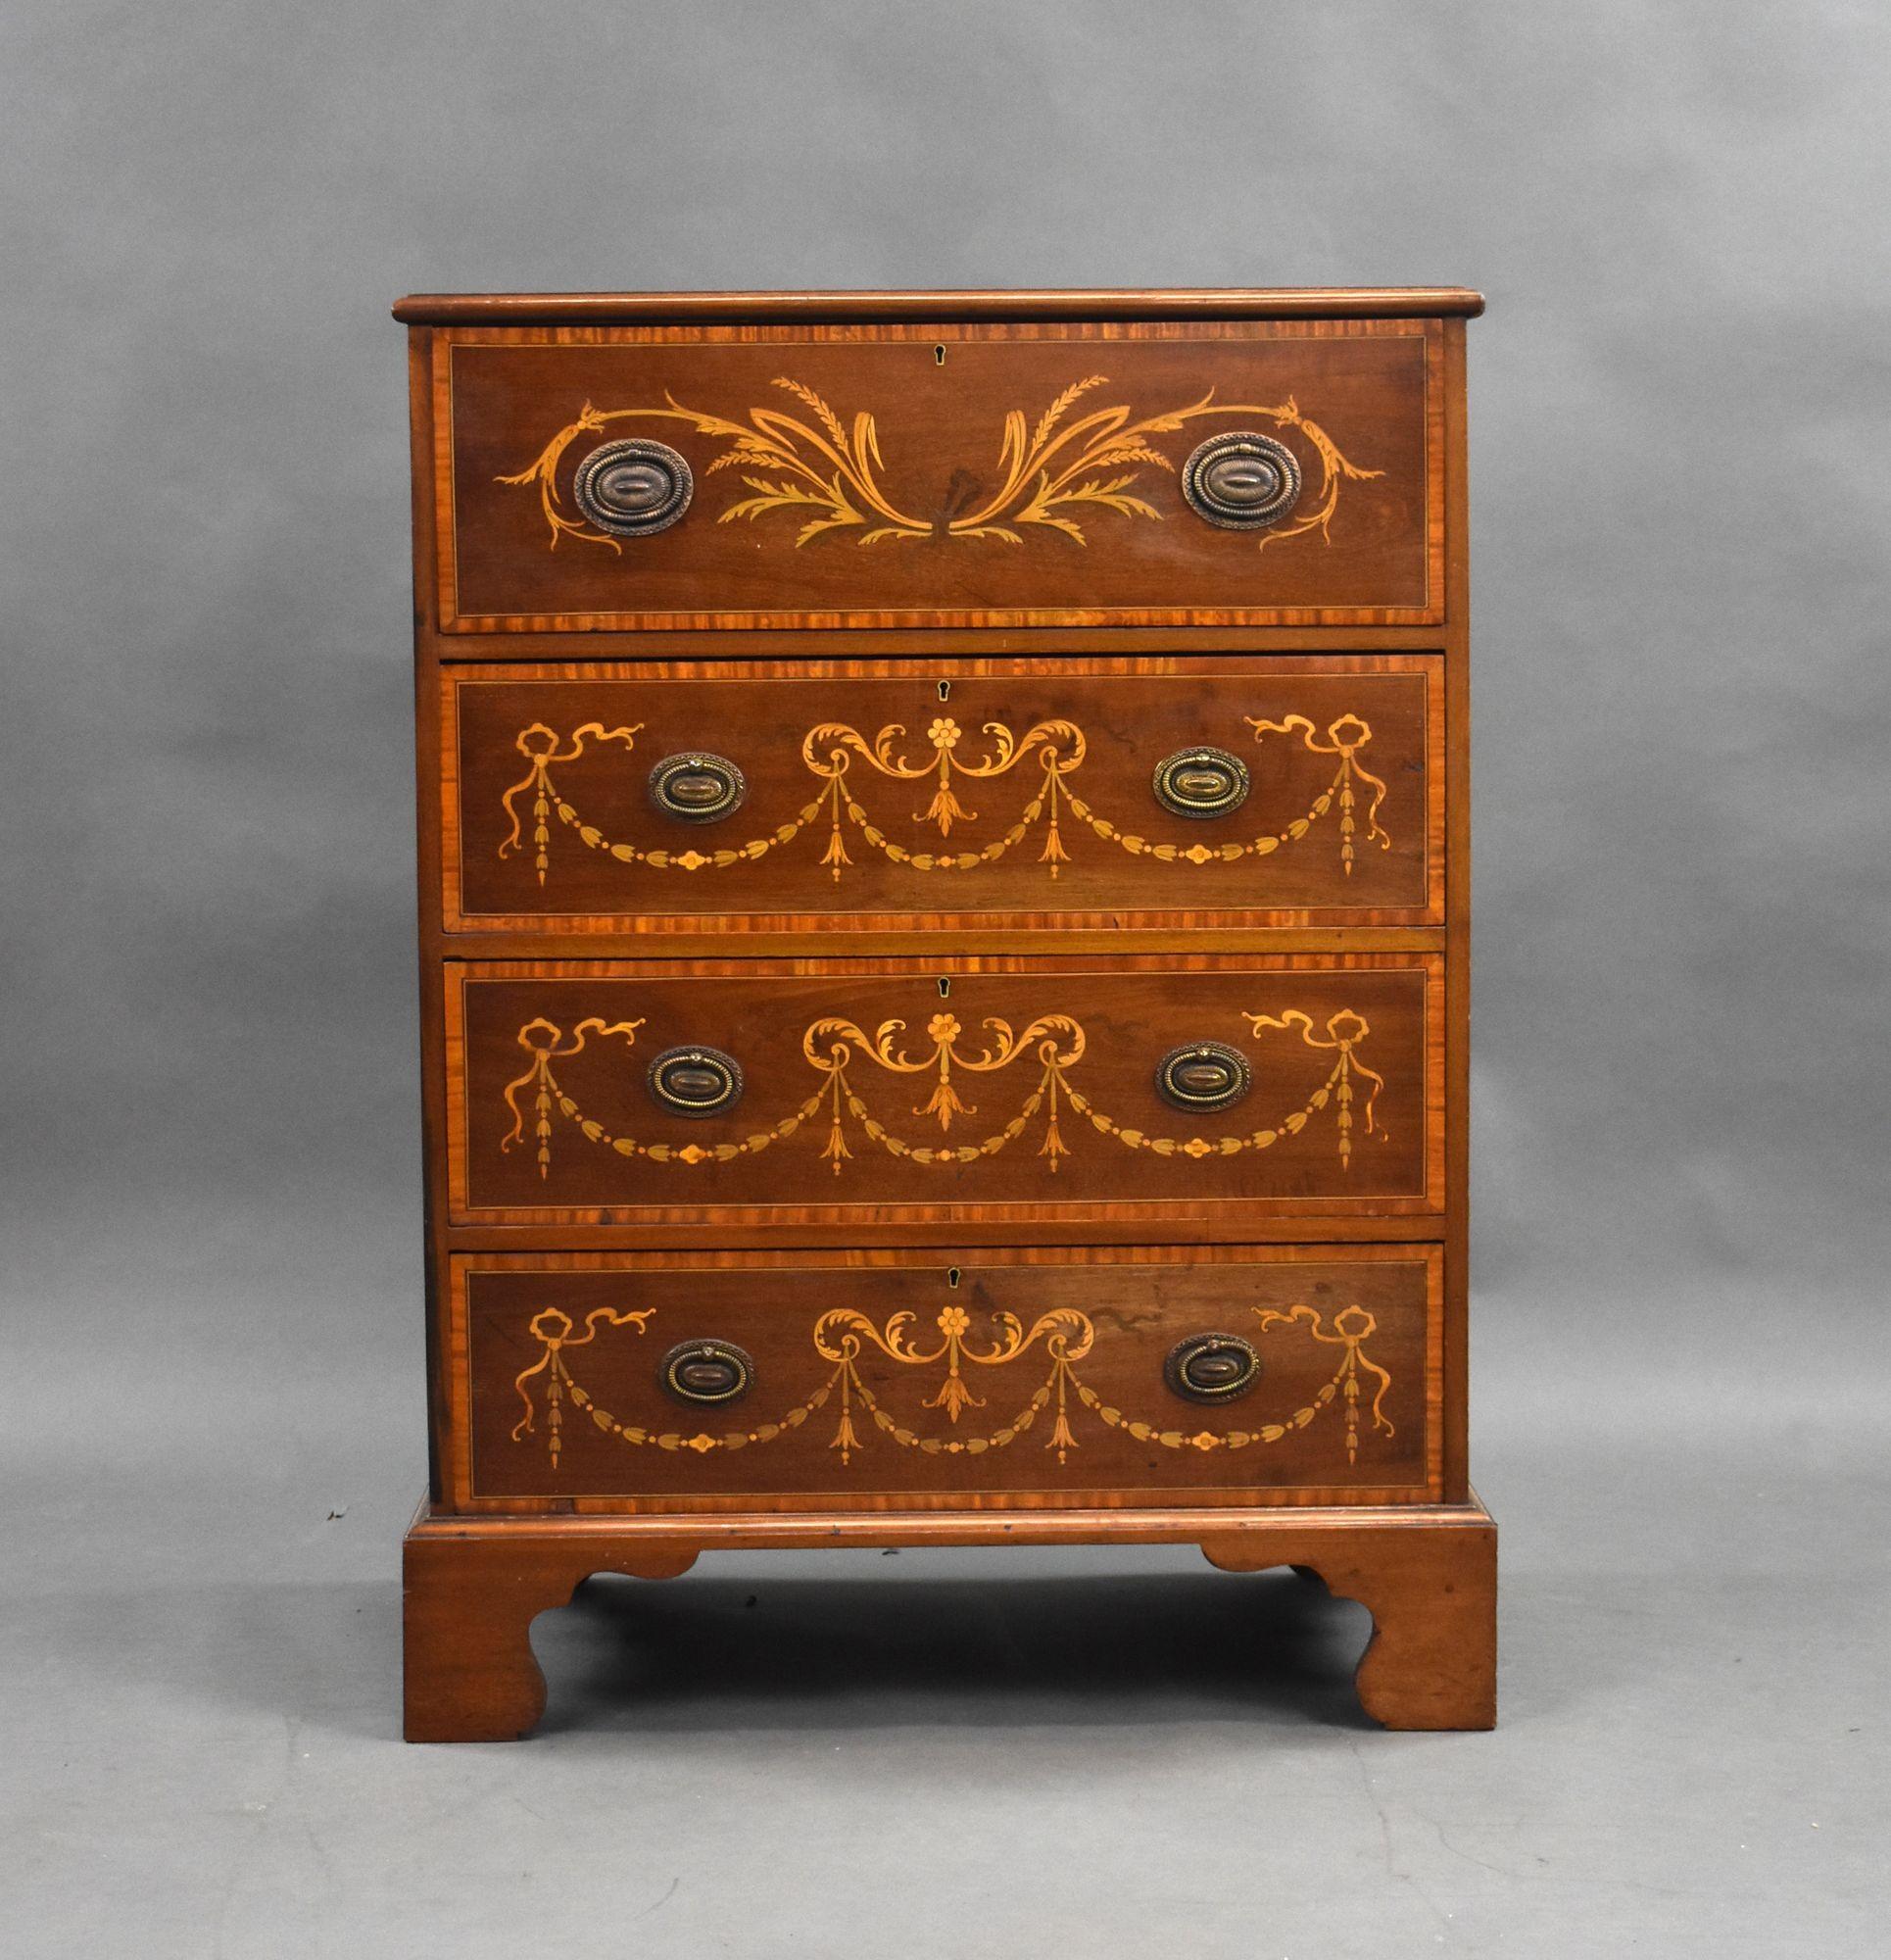 For sale is a fine quality Edwardian Sheraton revival inlaid mahogany secretaire chest of drawers, having an inlaid and banded top, above a single secretaire drawer, opening to reveal a fitted interior, above three inlaid drawers, each with brass